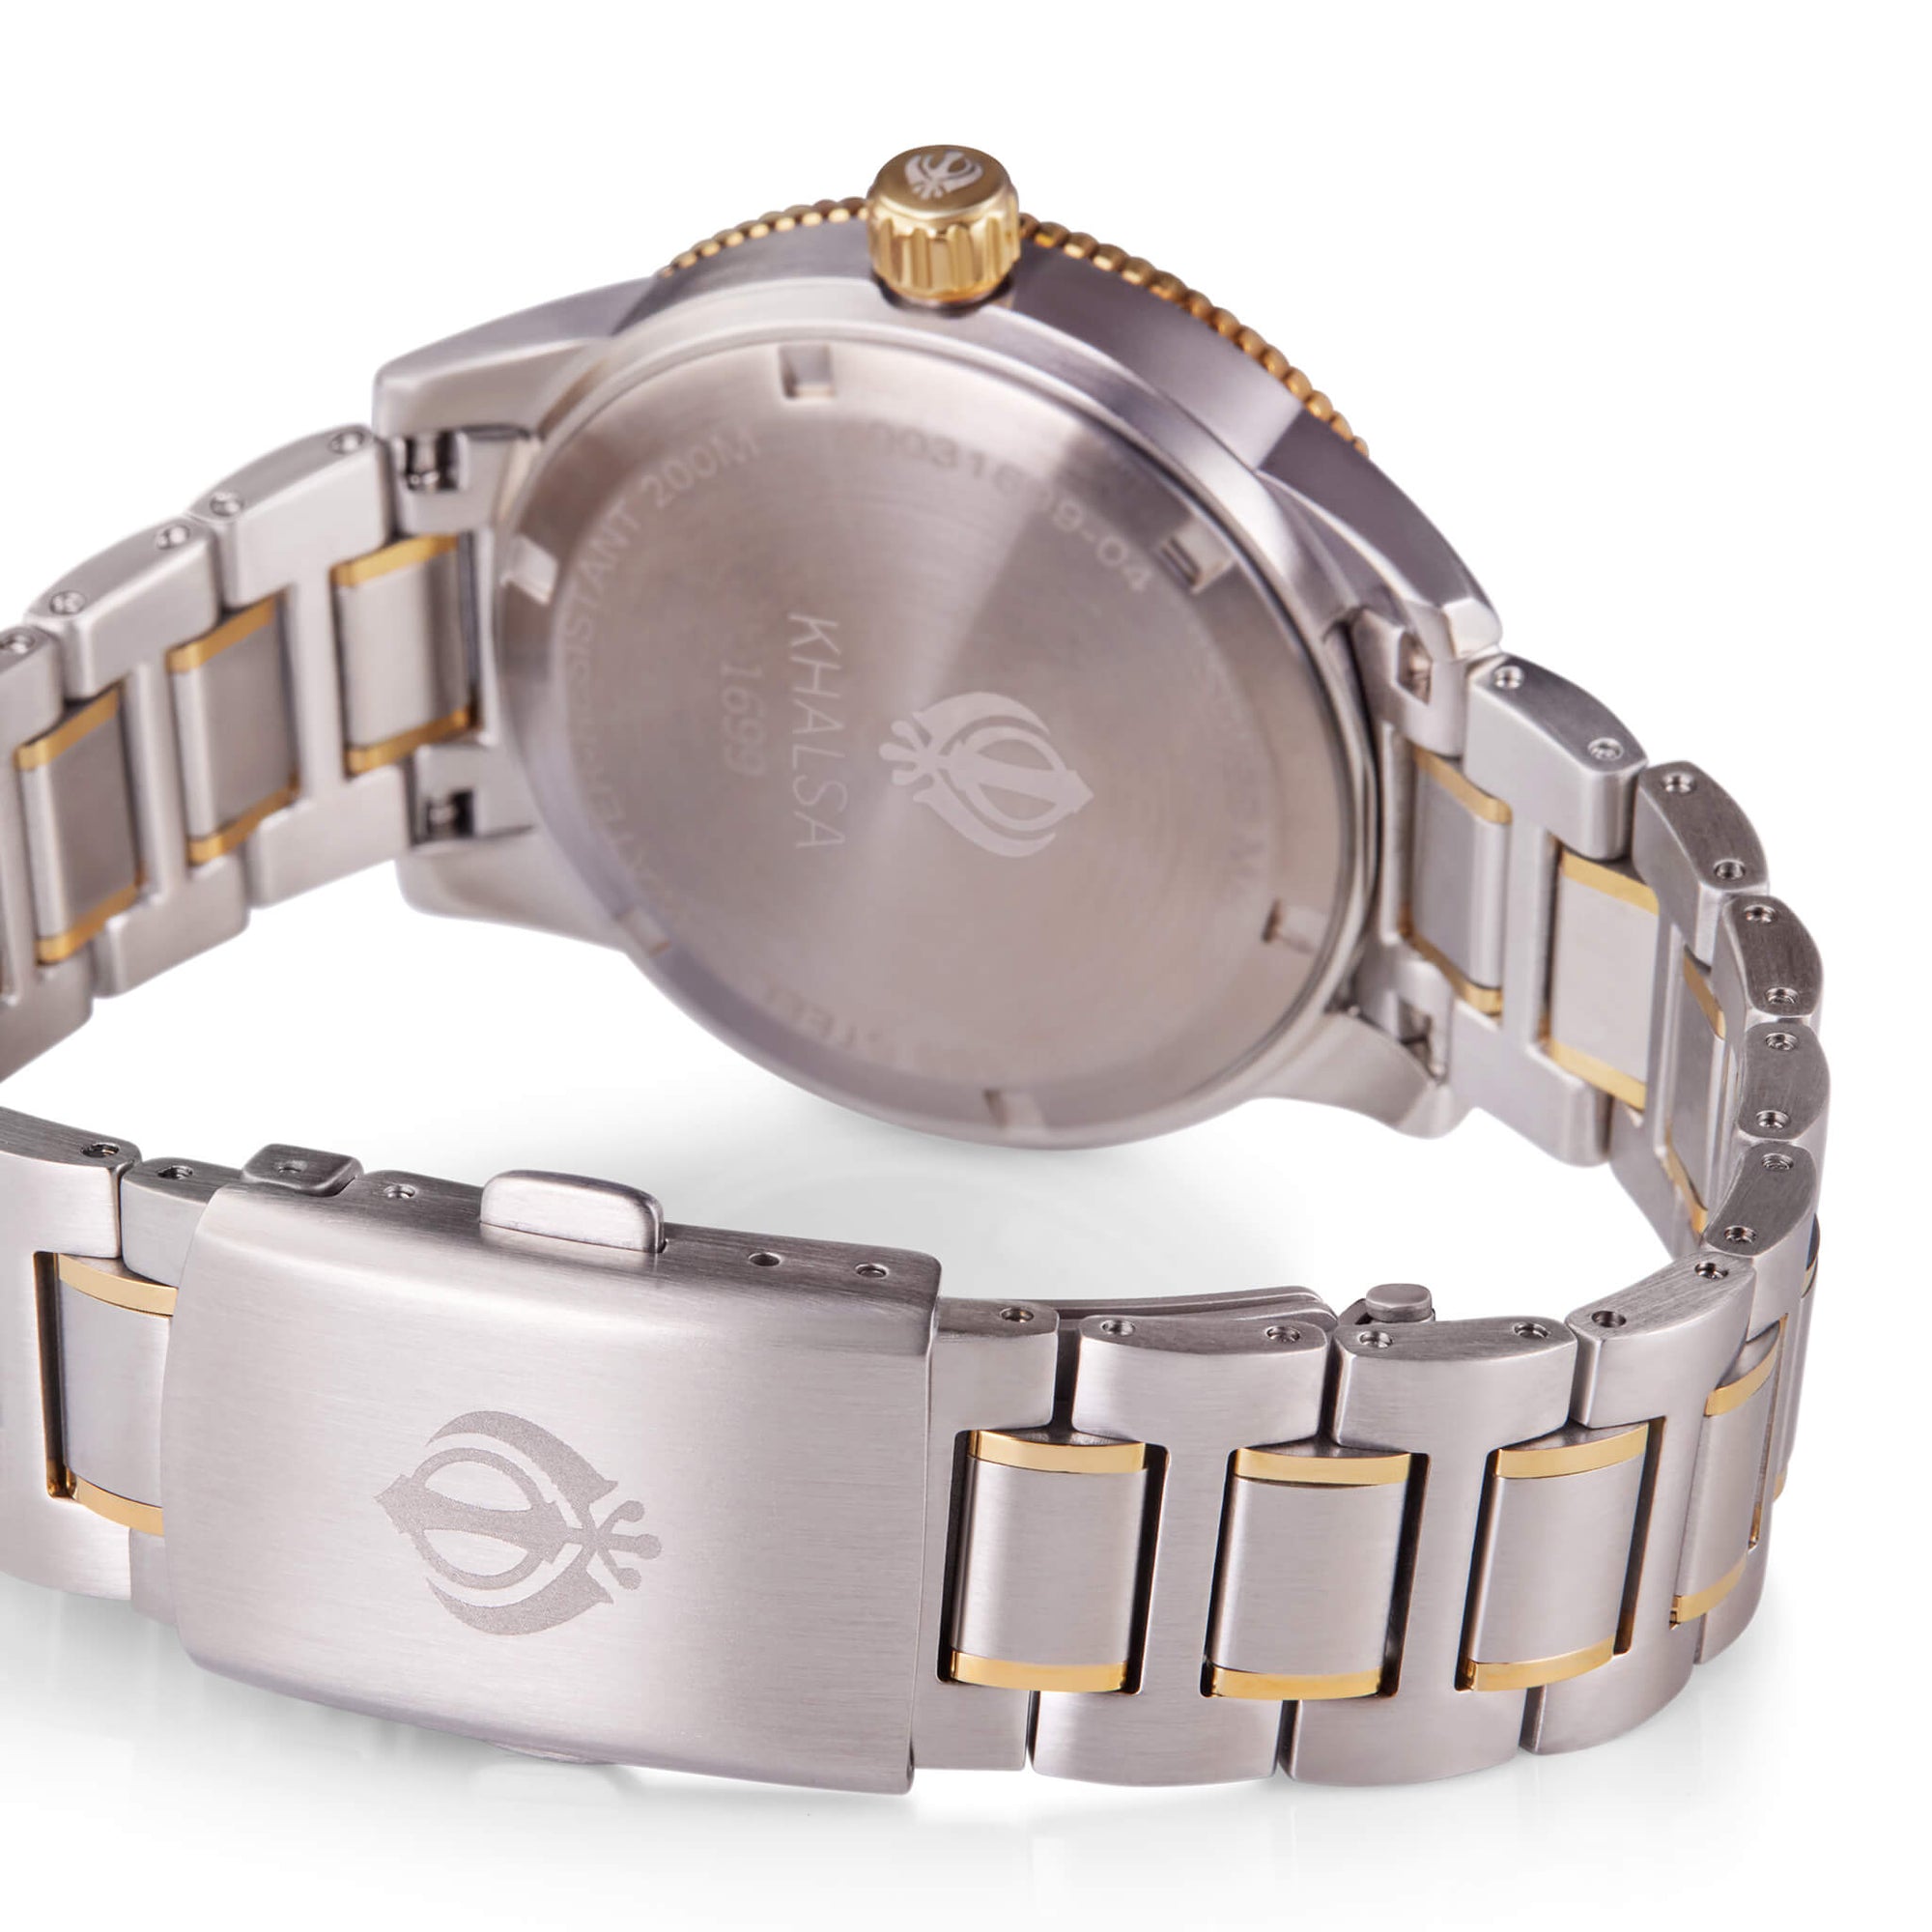 House of Khalsa Swiss-made Luxury Sports Lady Diver Kaur Sikh Watch with Khanda Symbol and Pearl Dials